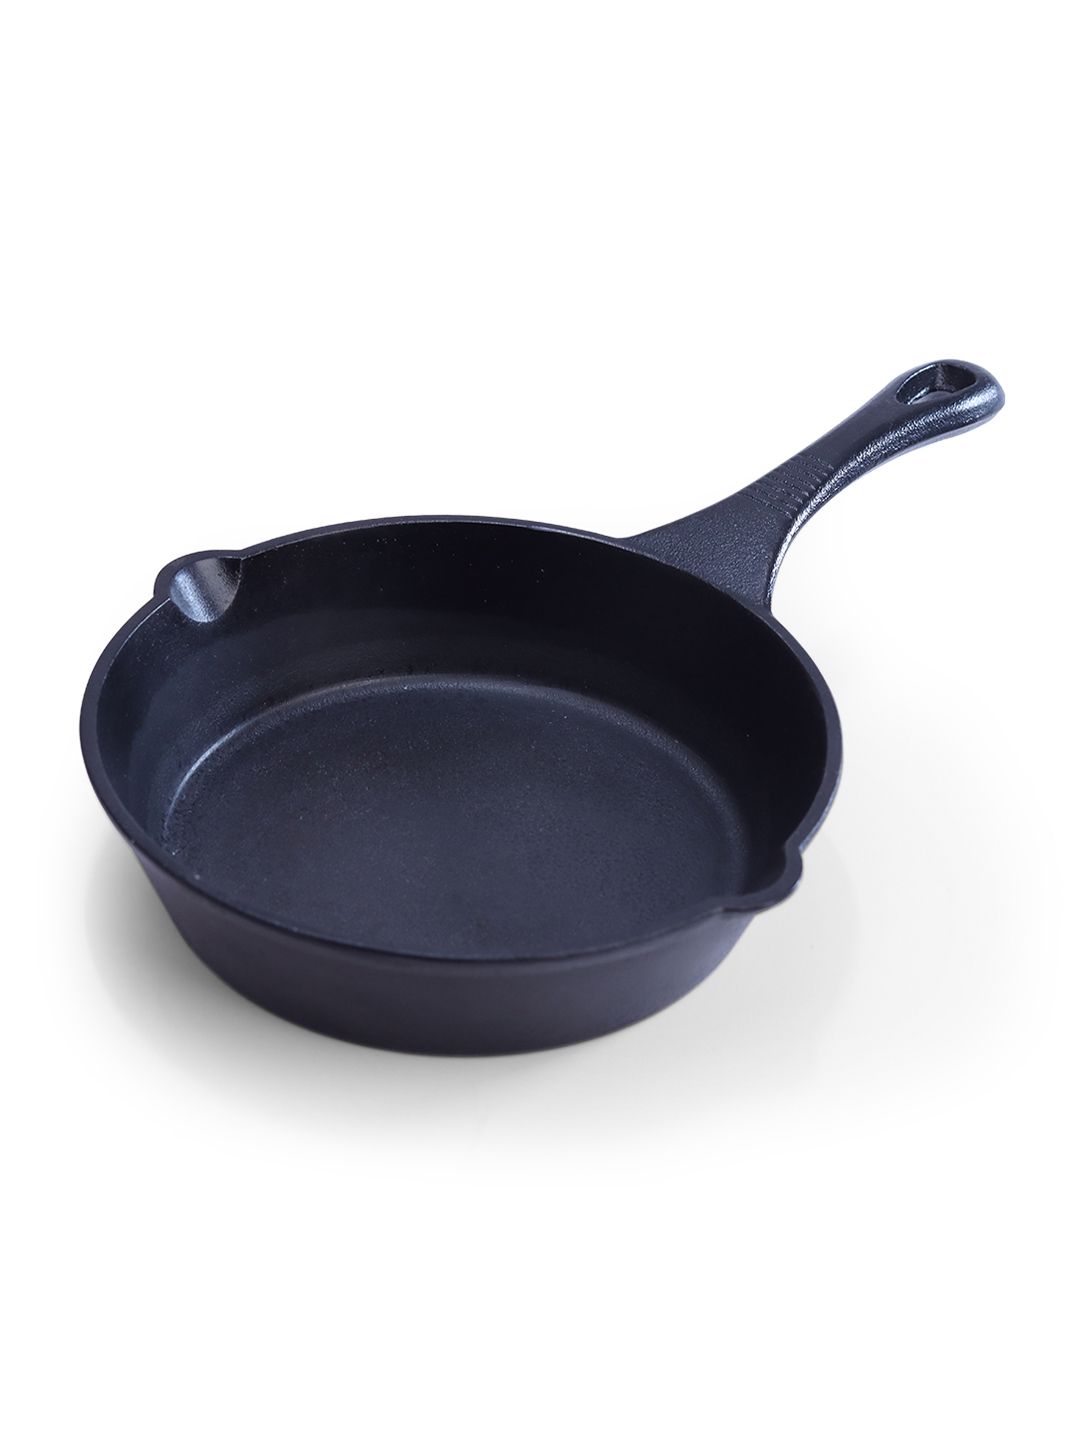 Wonderchef Black Solid Cast Iron Frying Pan Price in India